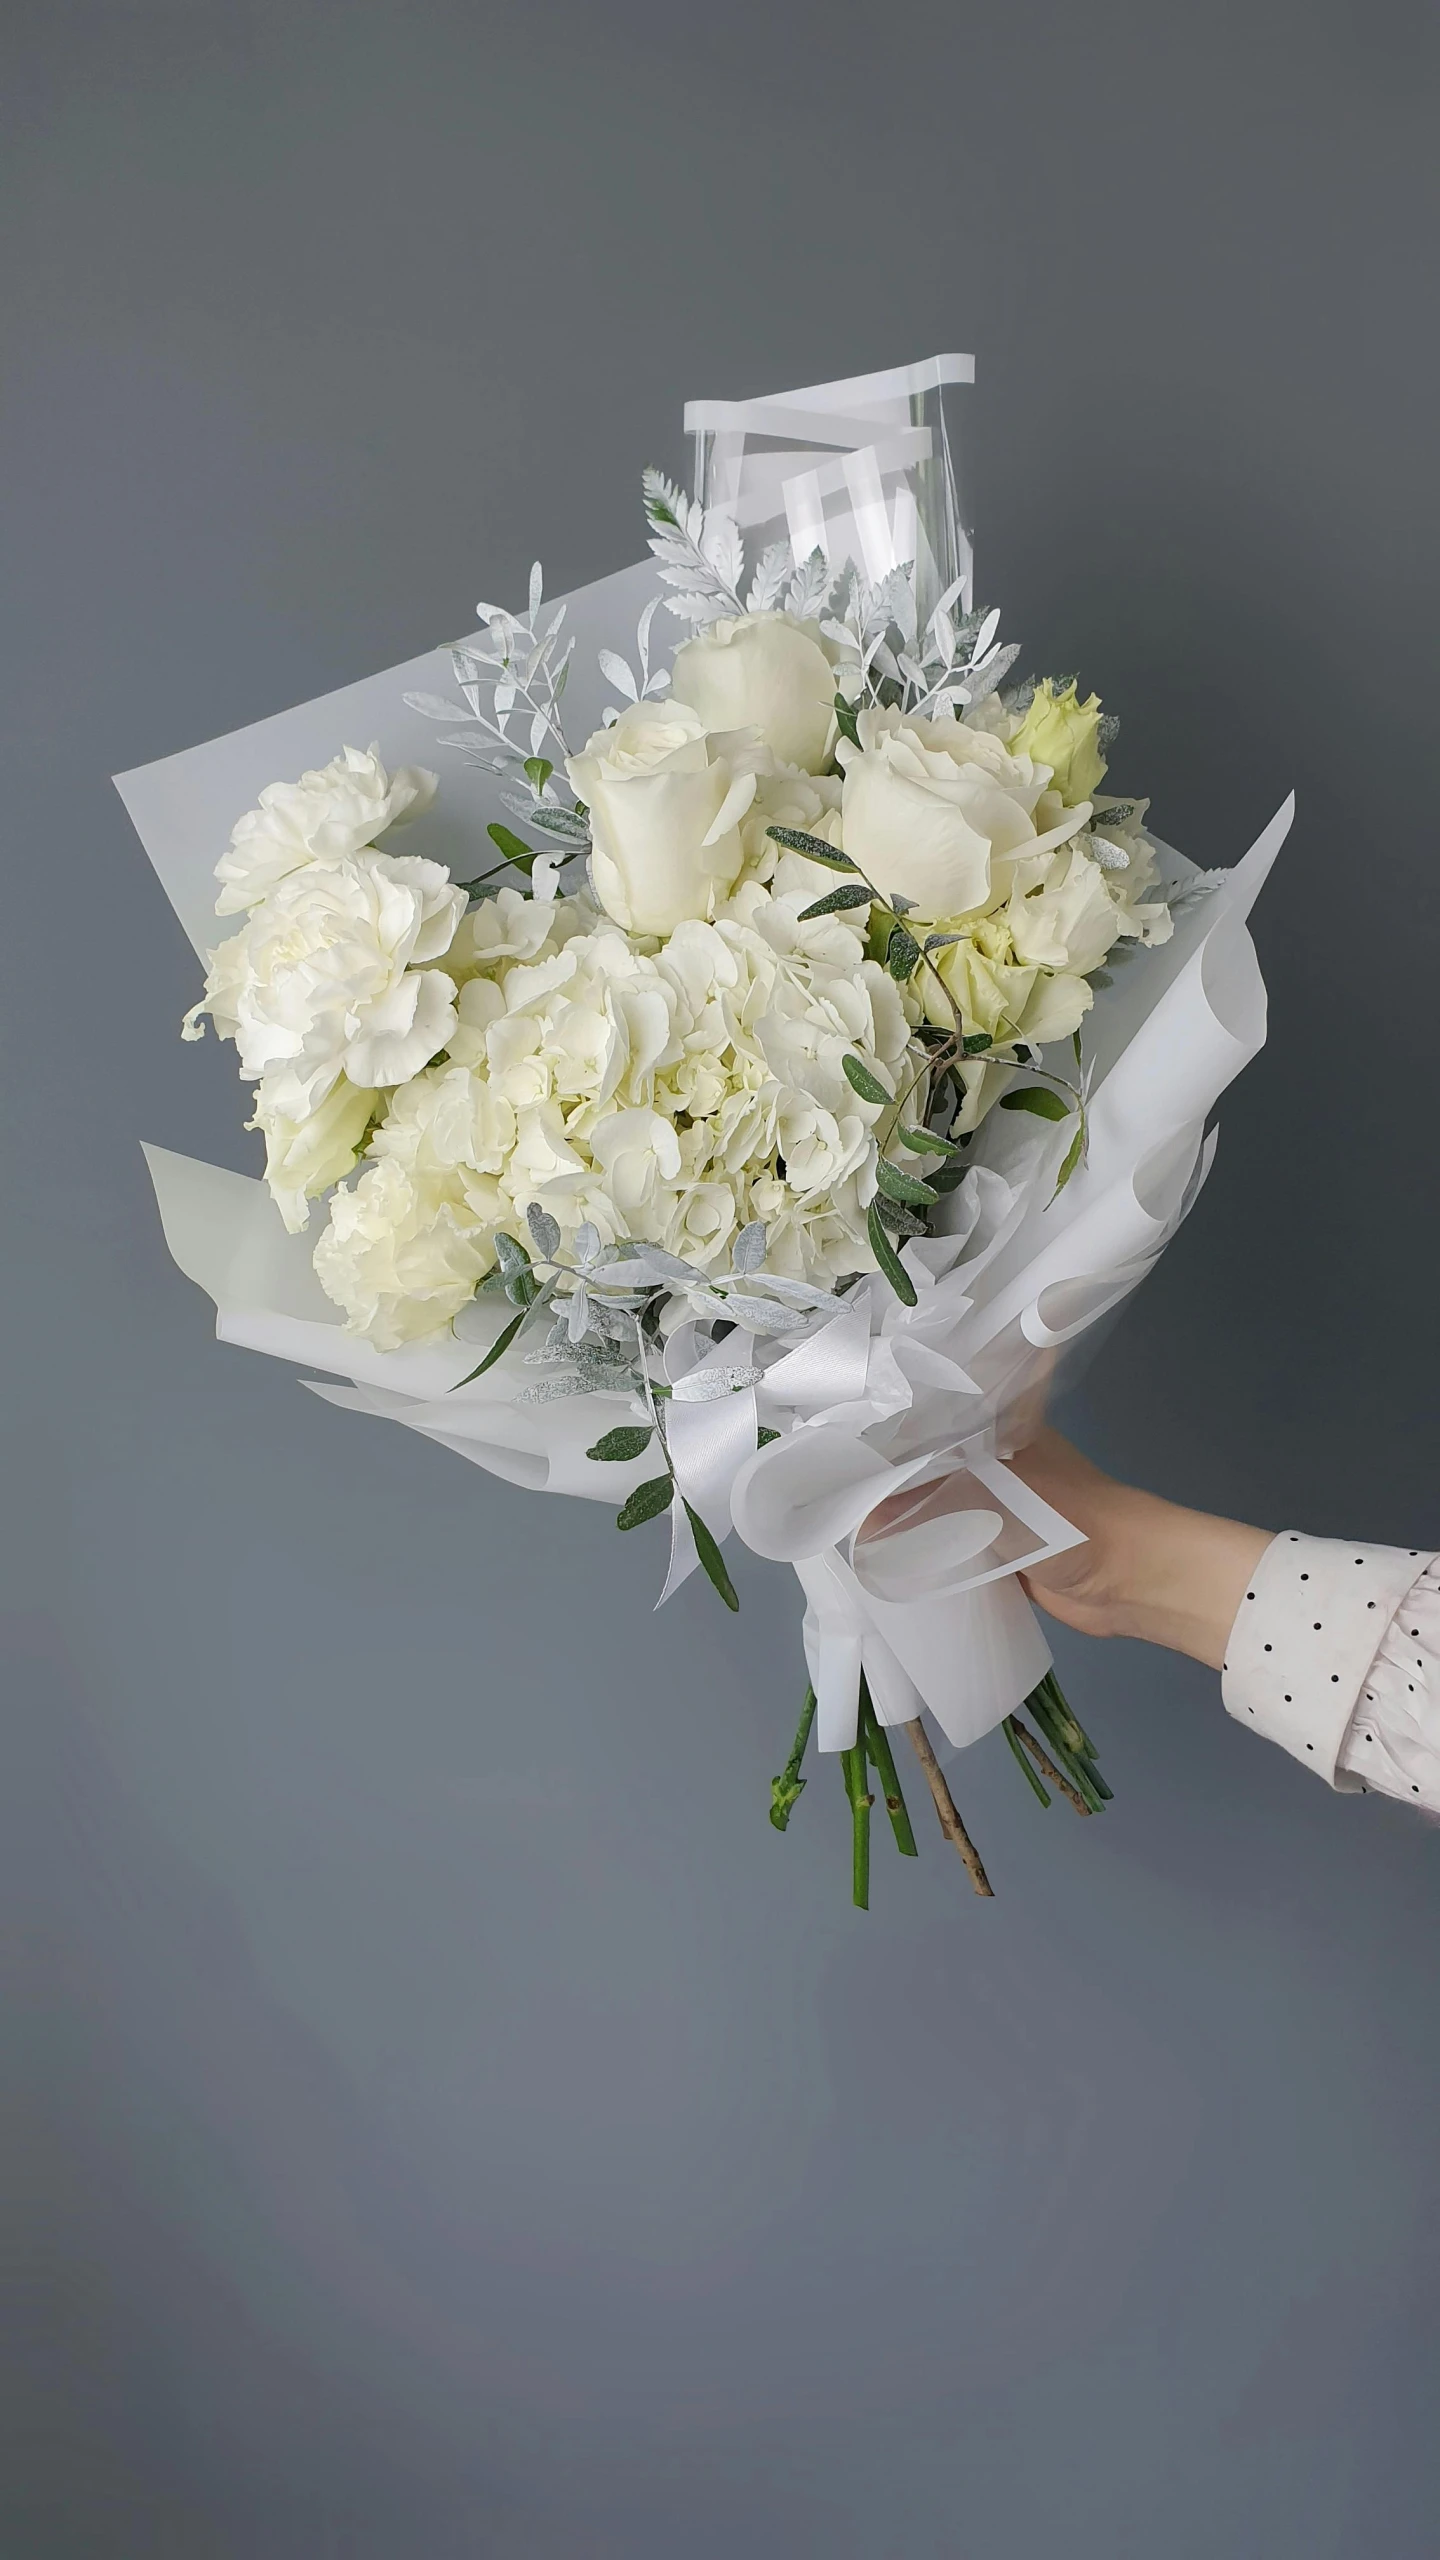 a woman holding a bouquet of white flowers, made in tones of white and grey, titanium white, hey buddy, on a gray background